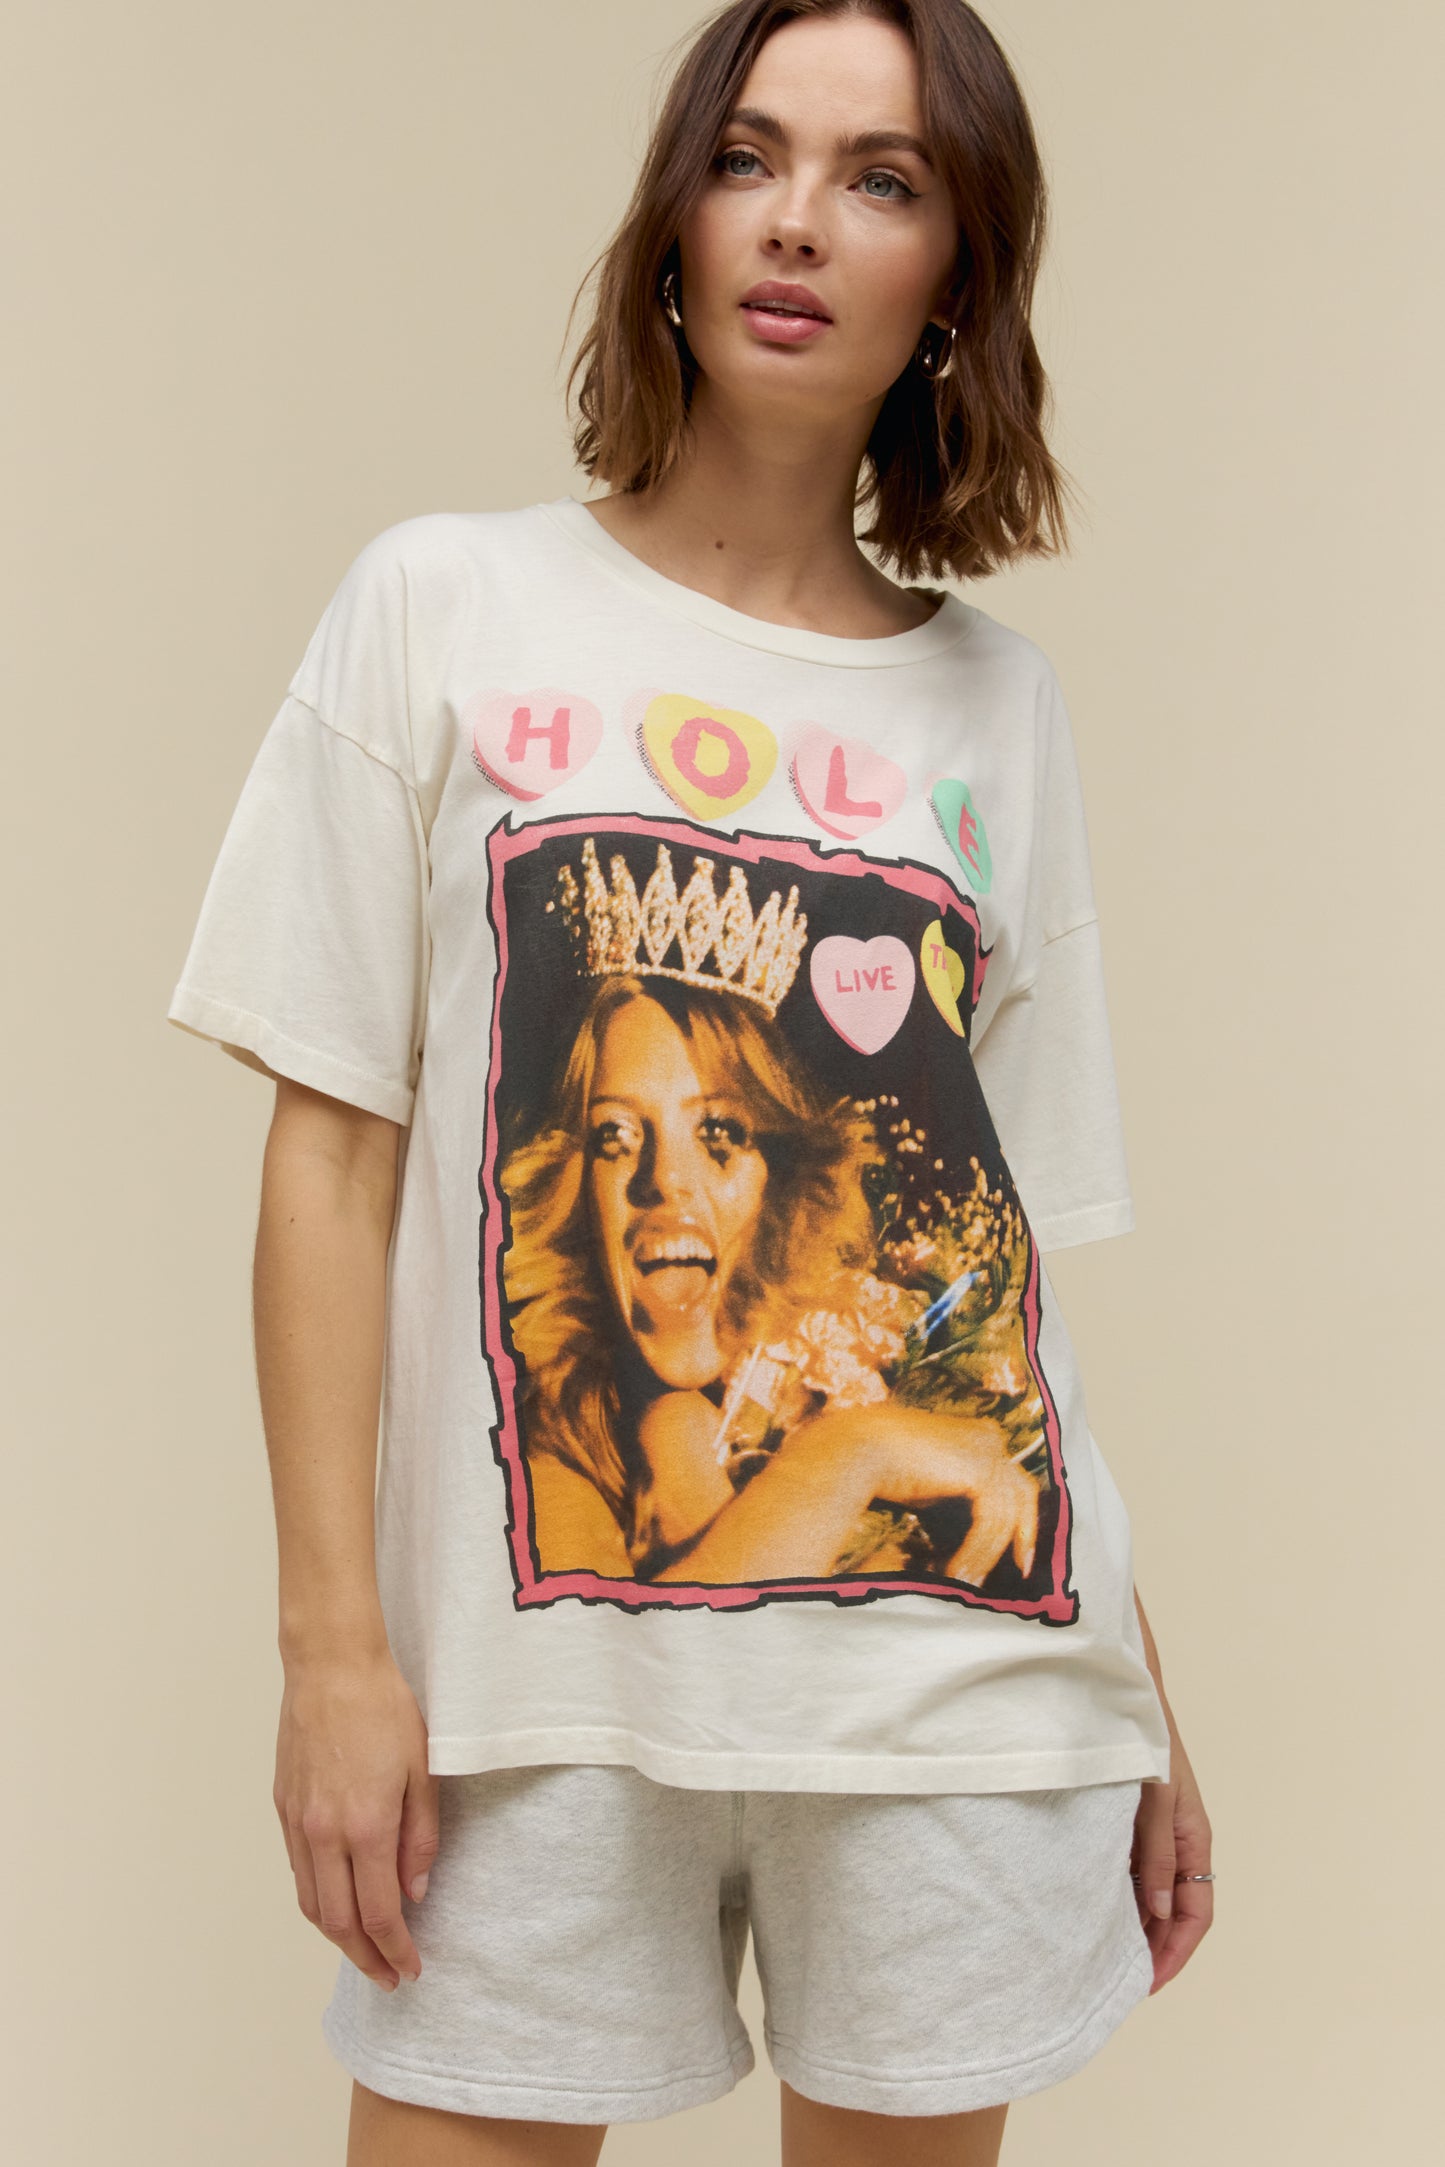 Model wearing a 90s Hole merch tee with grungy, poster style designed with the original artwork from Hole’s second studio album “Live Through This.” The tour details stamped along the back.